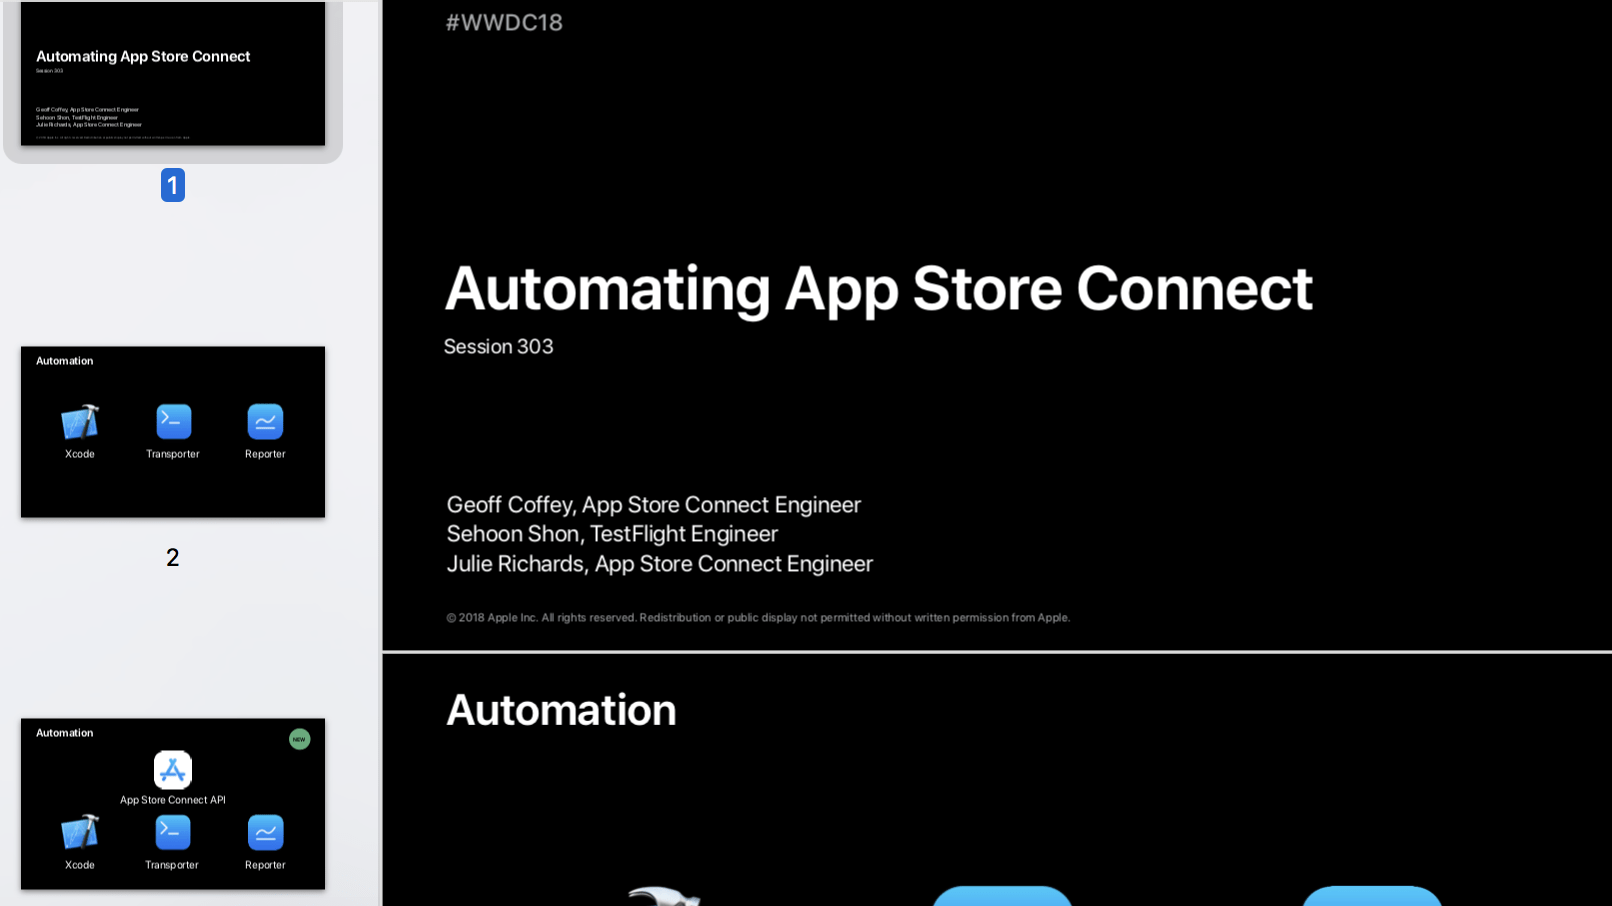 App Store Connect Automation Session 303 WWDC 18